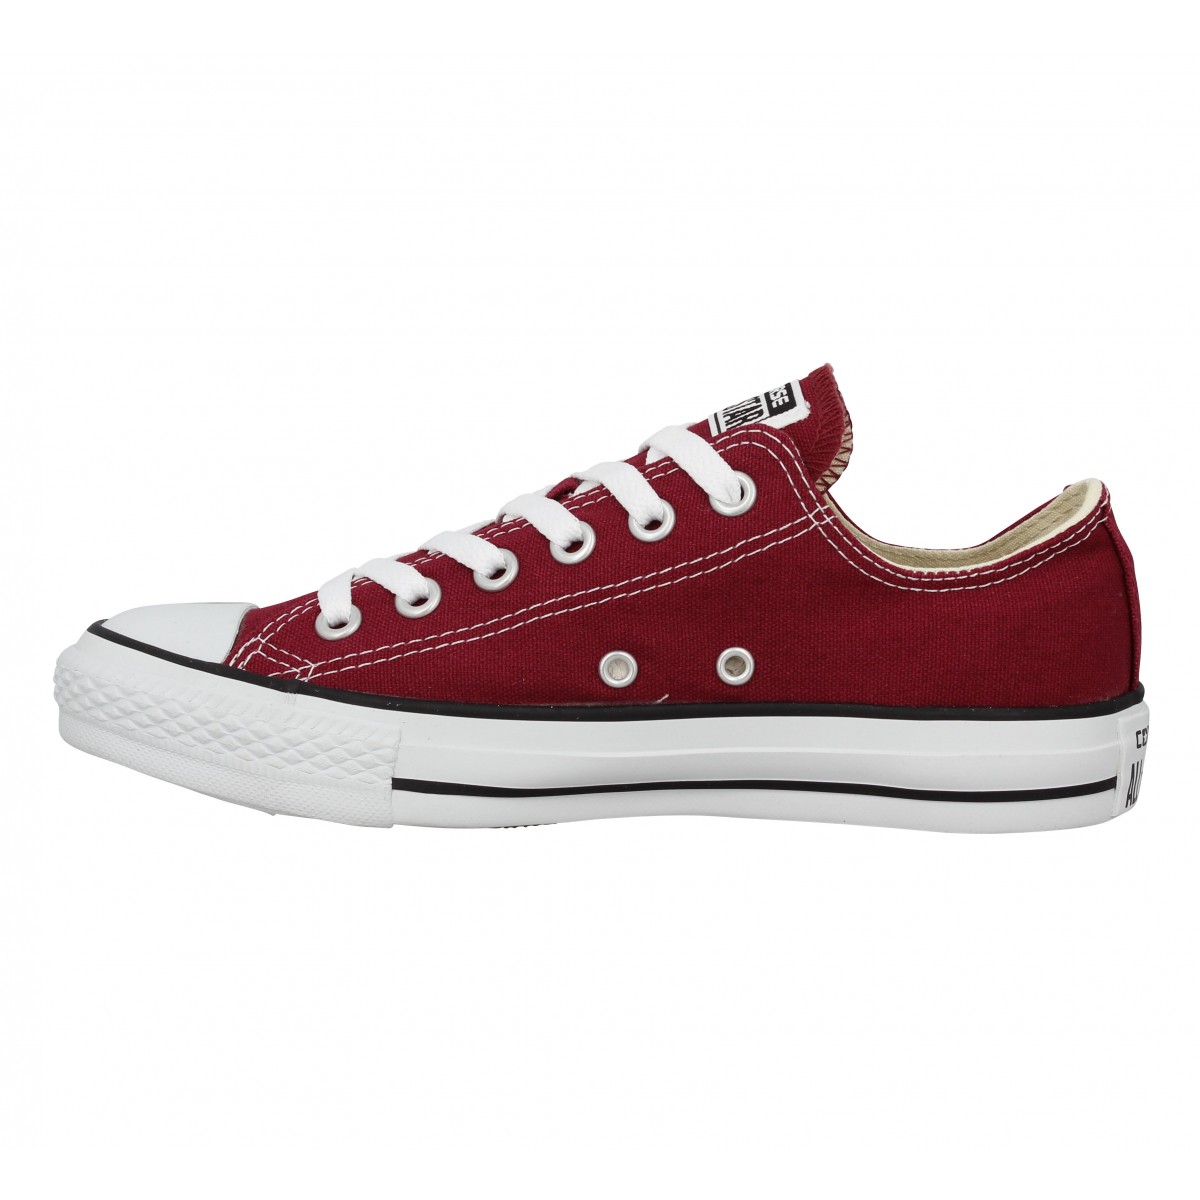 CONVERSE Chuck Taylor All Star toile Homme Bordeaux